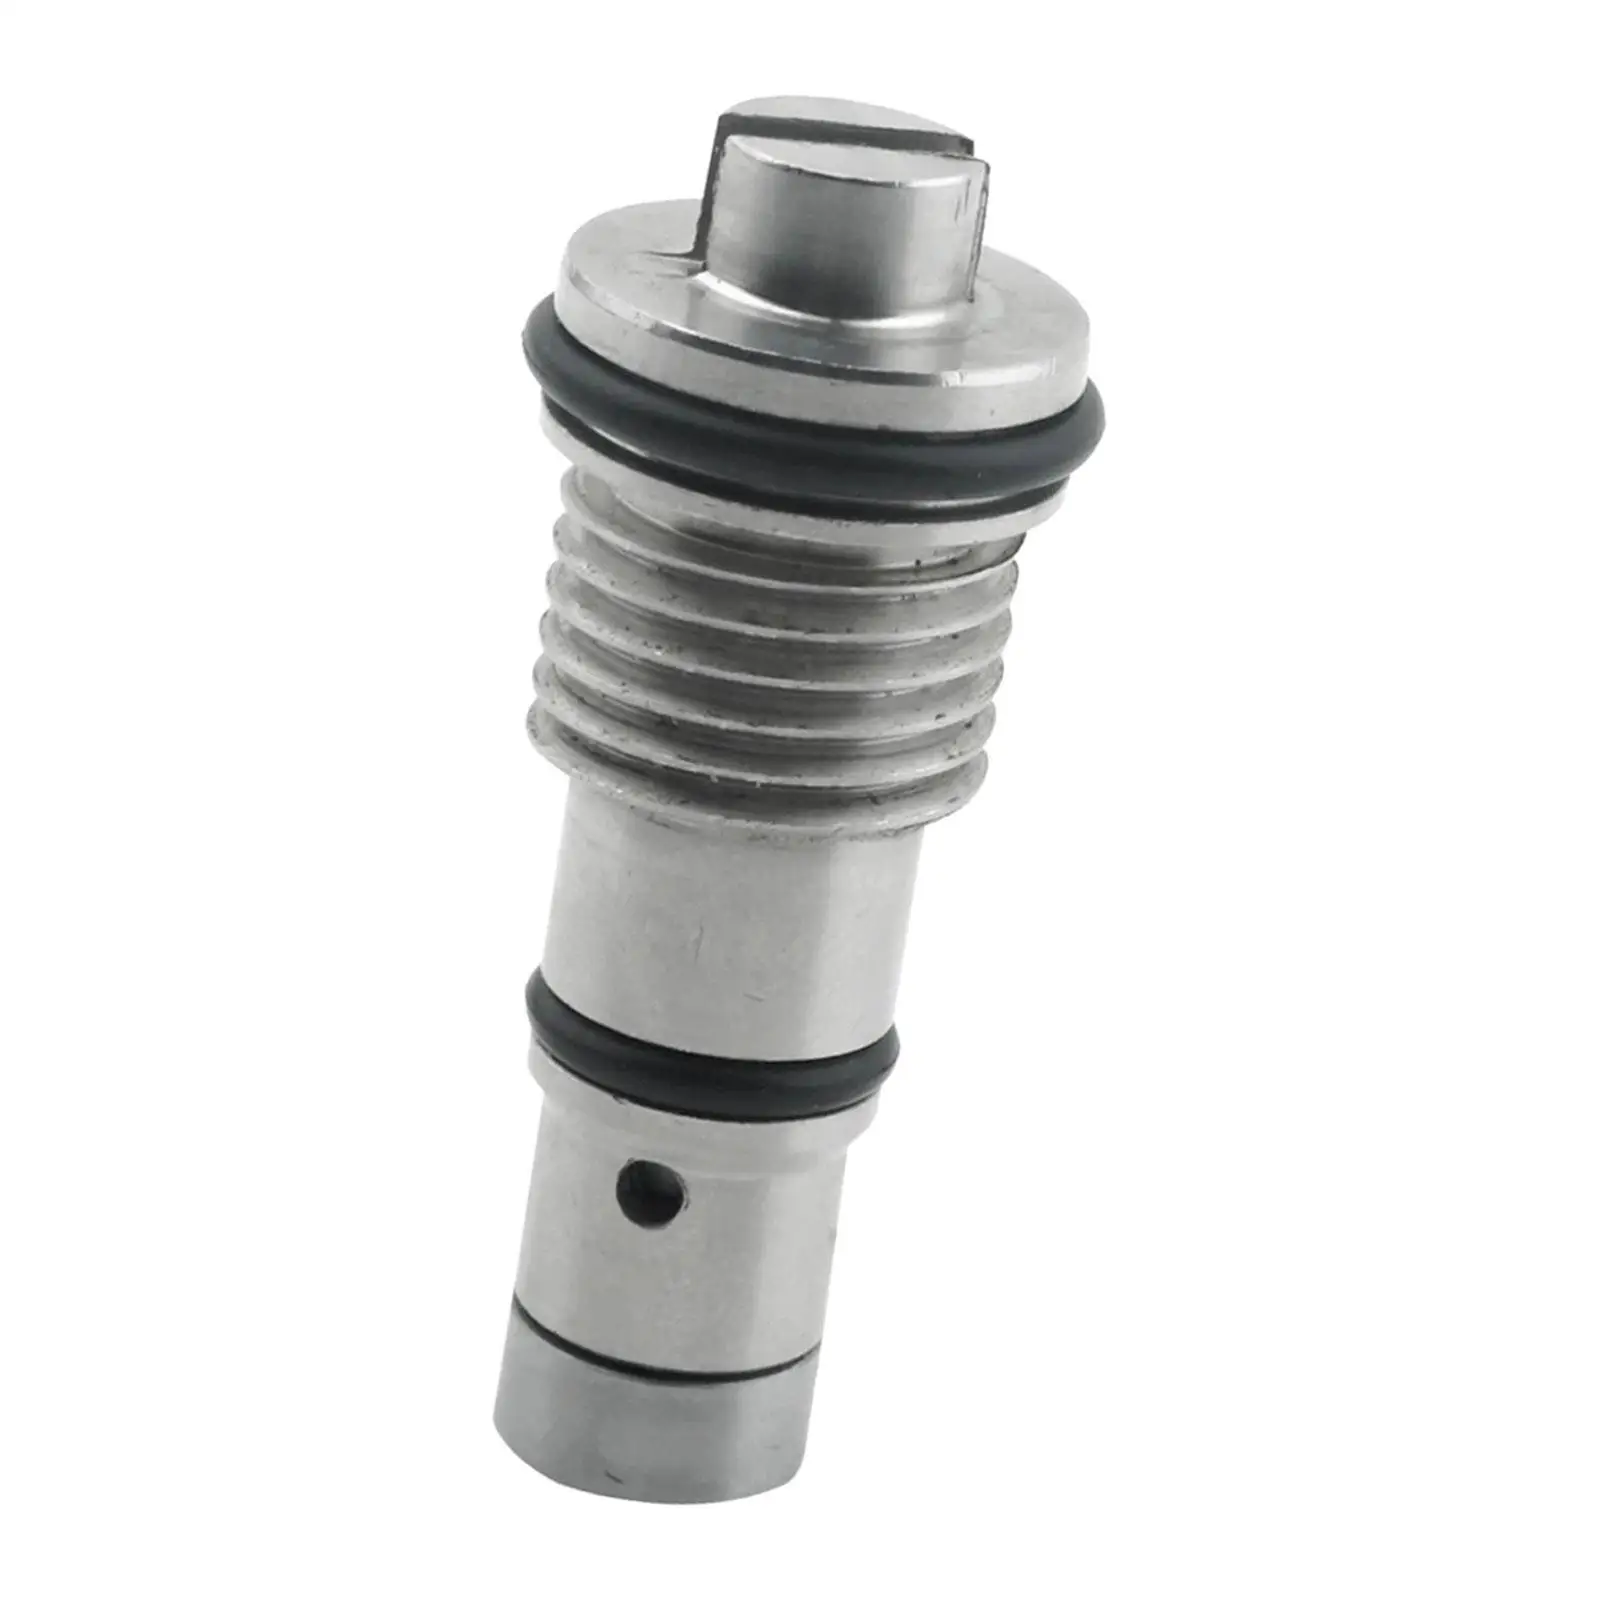 Manual Release Valve Replacement 48864-94911 for Suzuki Outboard Trim Tilt Easily Install Good Performance Replacement